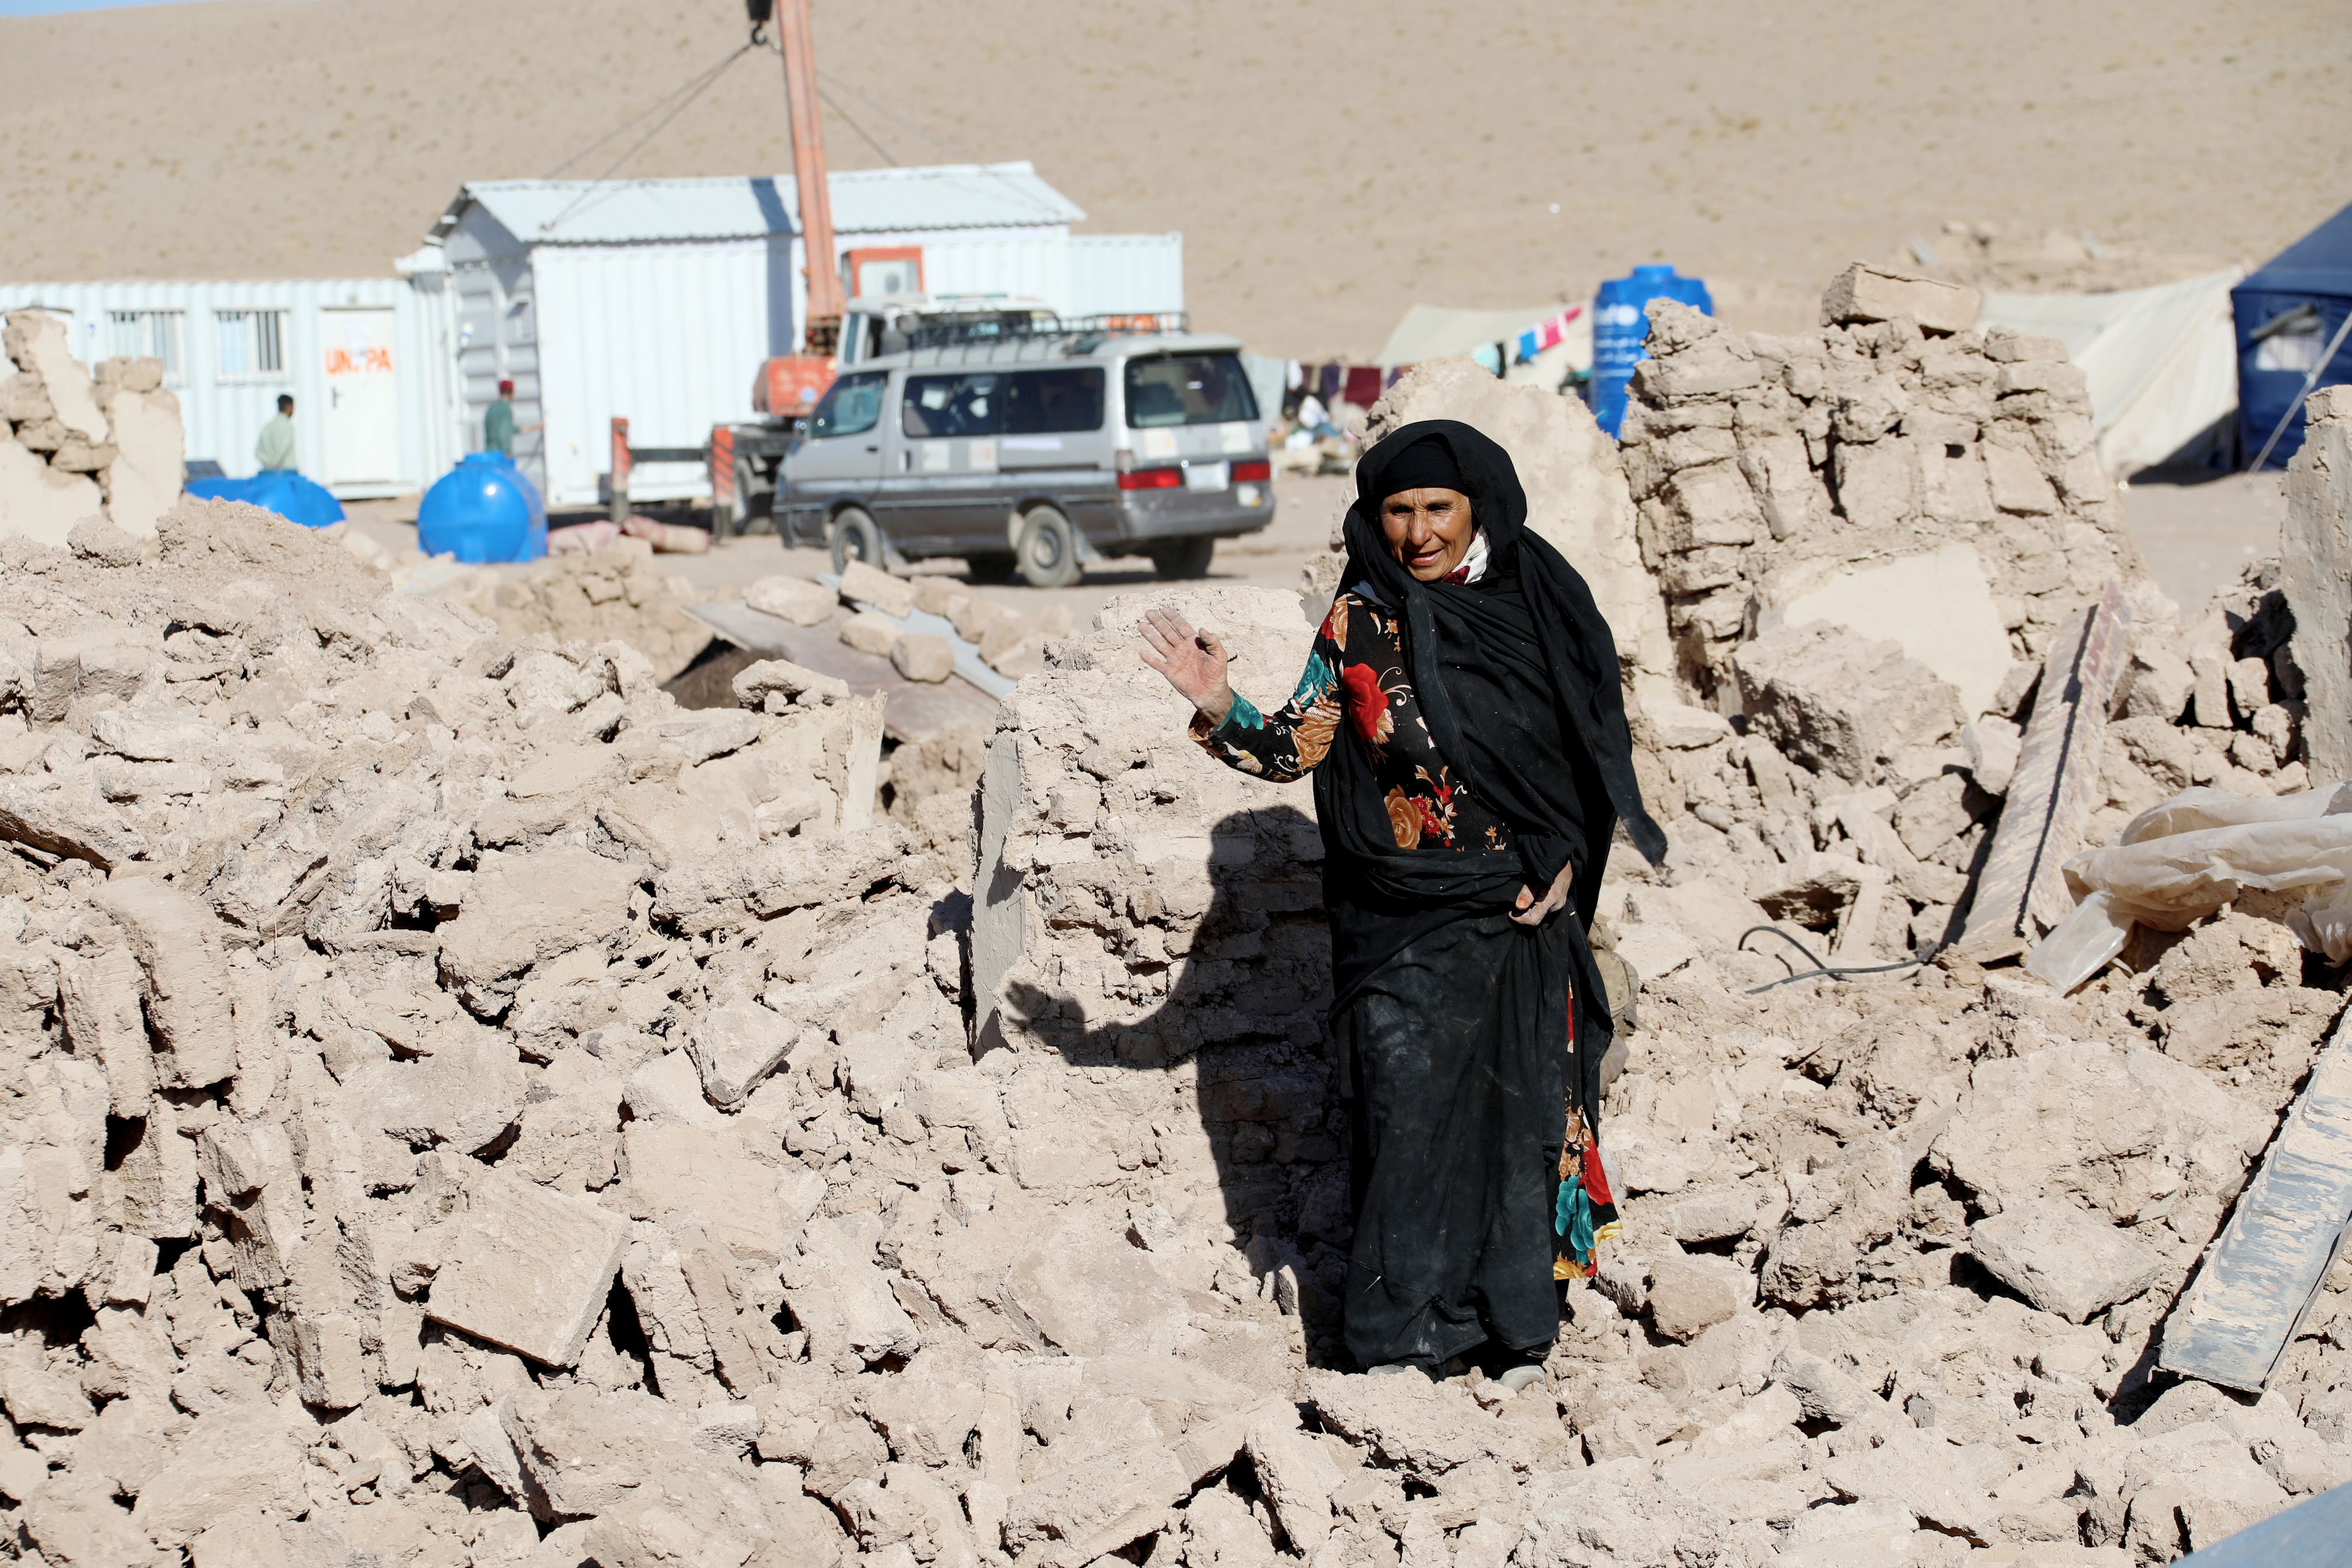 Woman standing in the rubble after earthquake